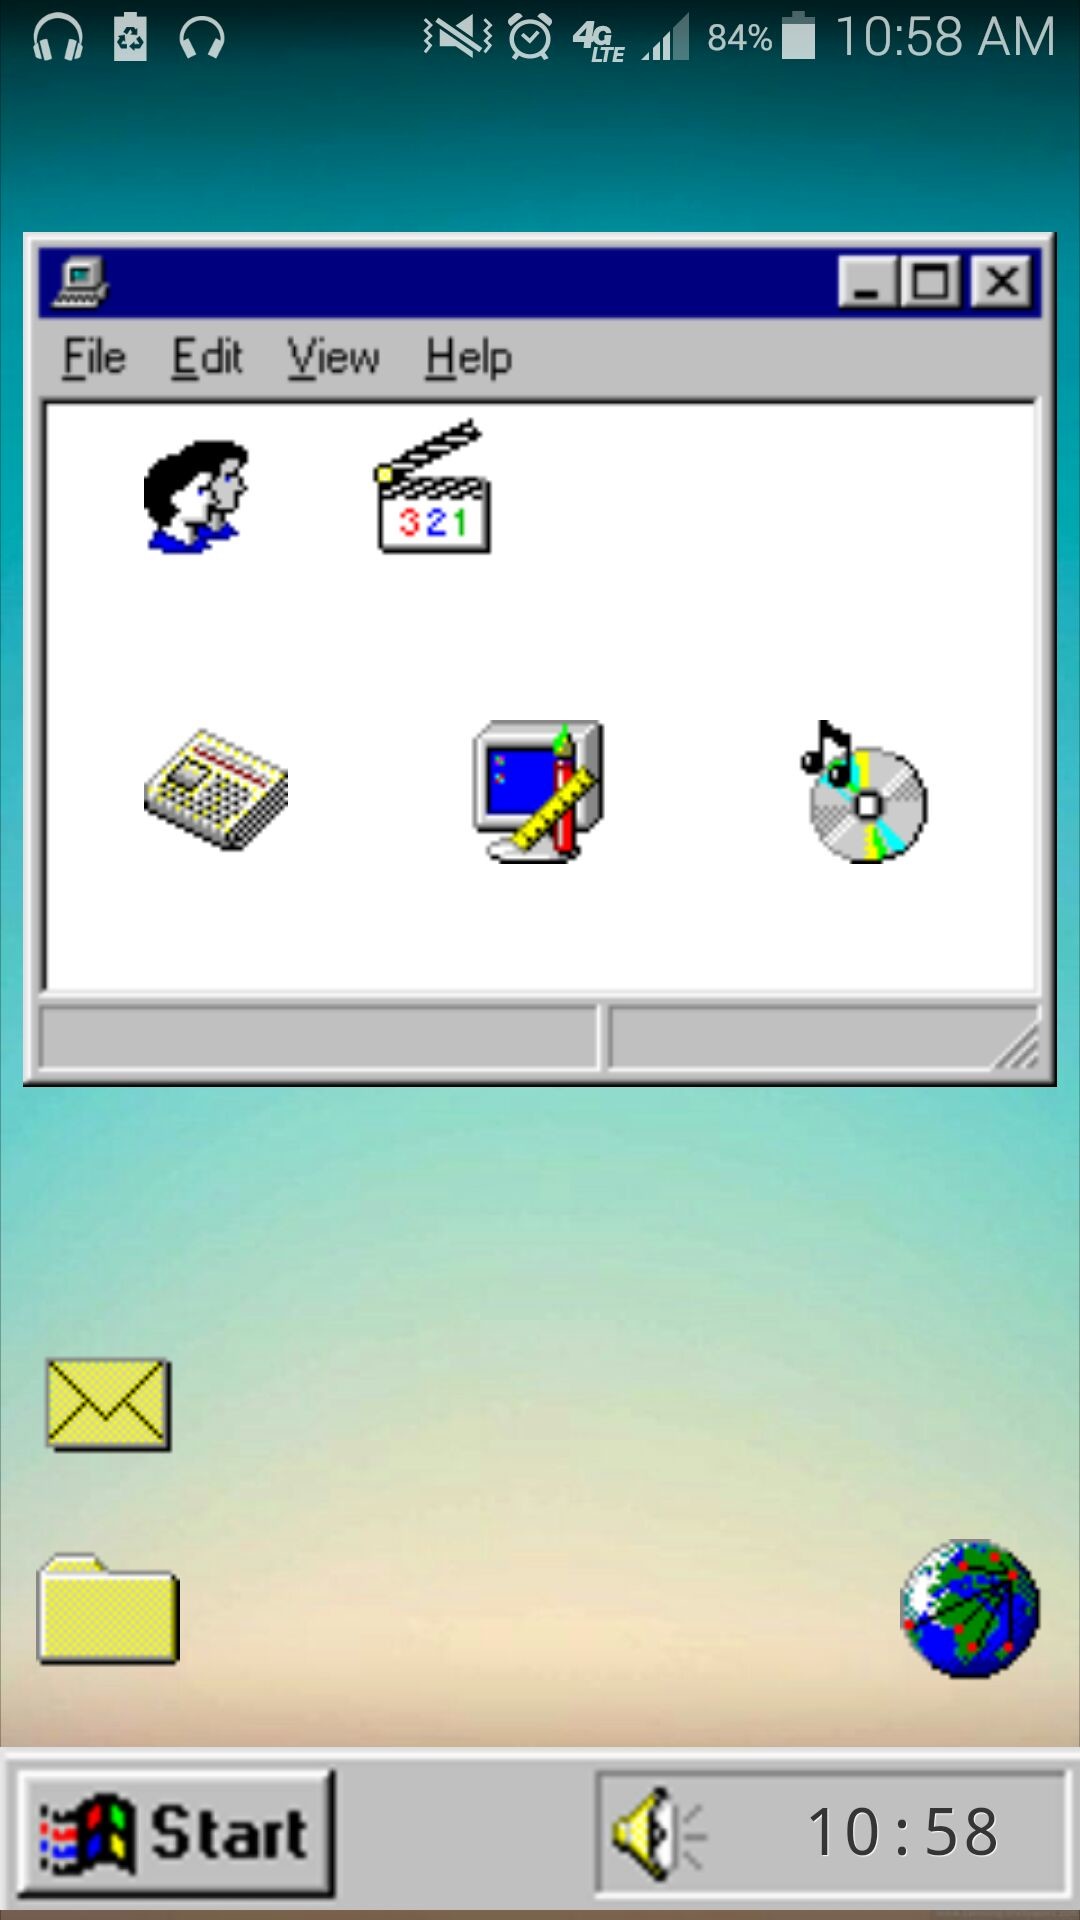 1080x1920 [Functional] My version of the Retro Windows 95 theme I've been using for a  while ...